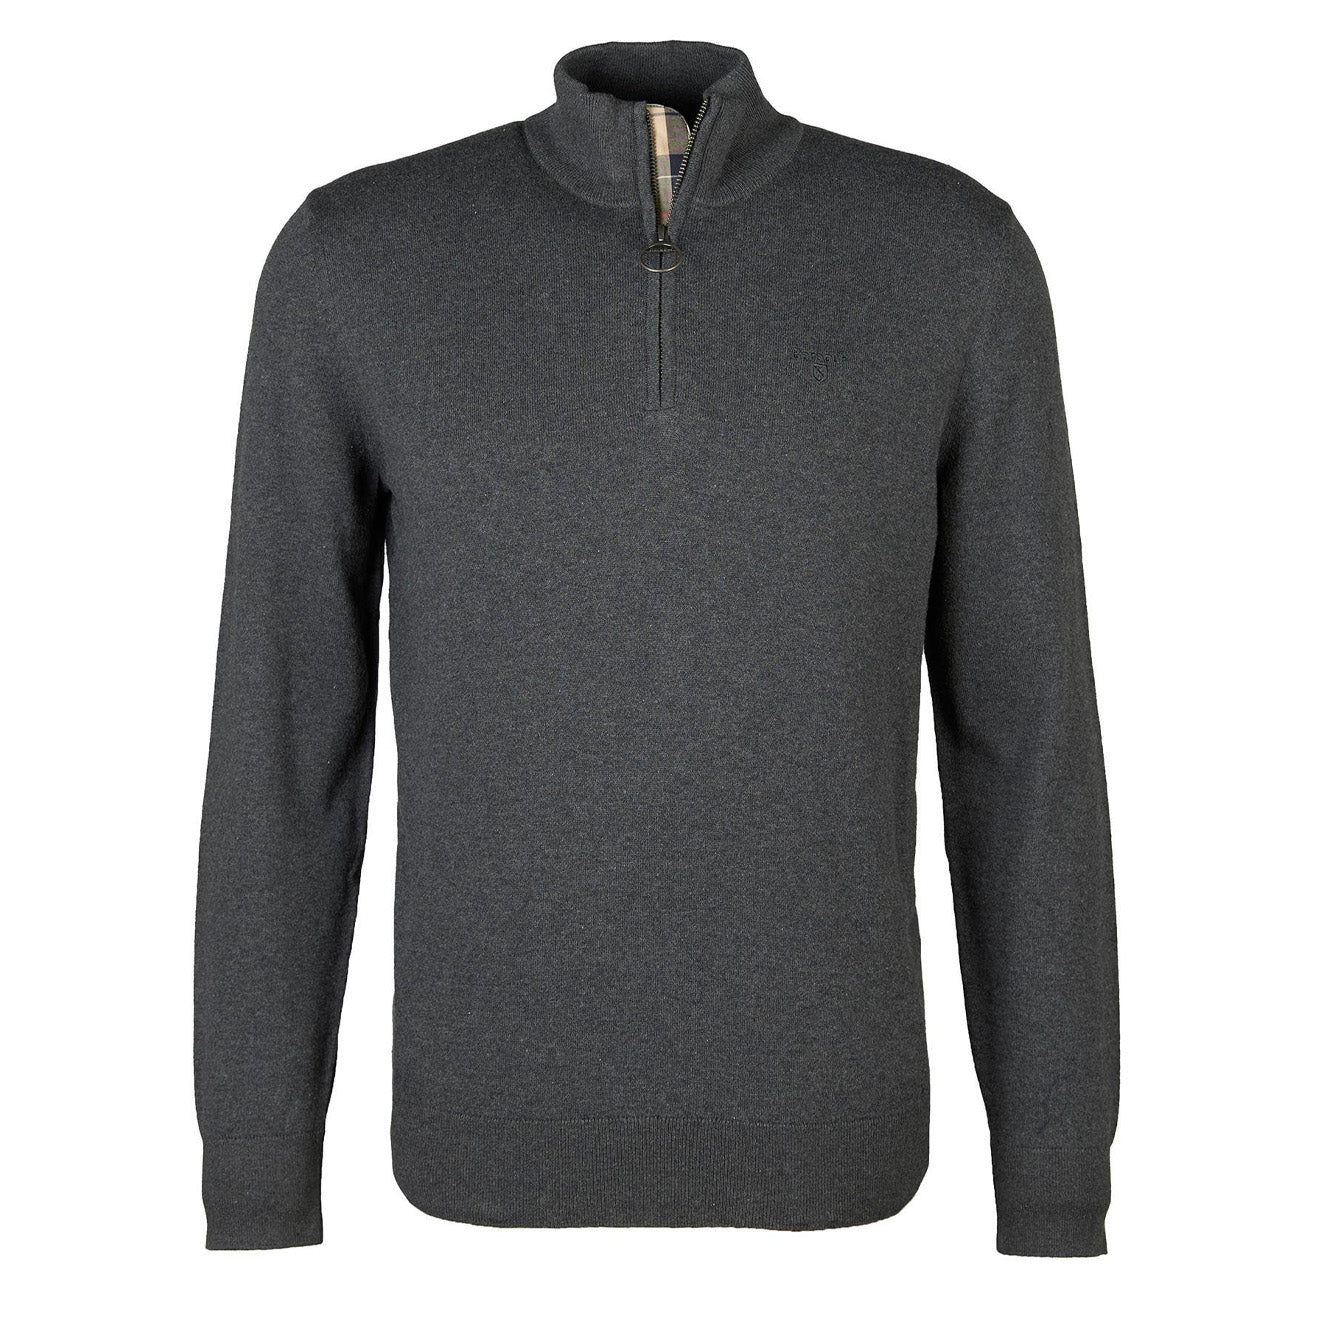 Barbour Taines Half-Zip Knitted Sweatshirt Charcoal Marl | The Sporting ...